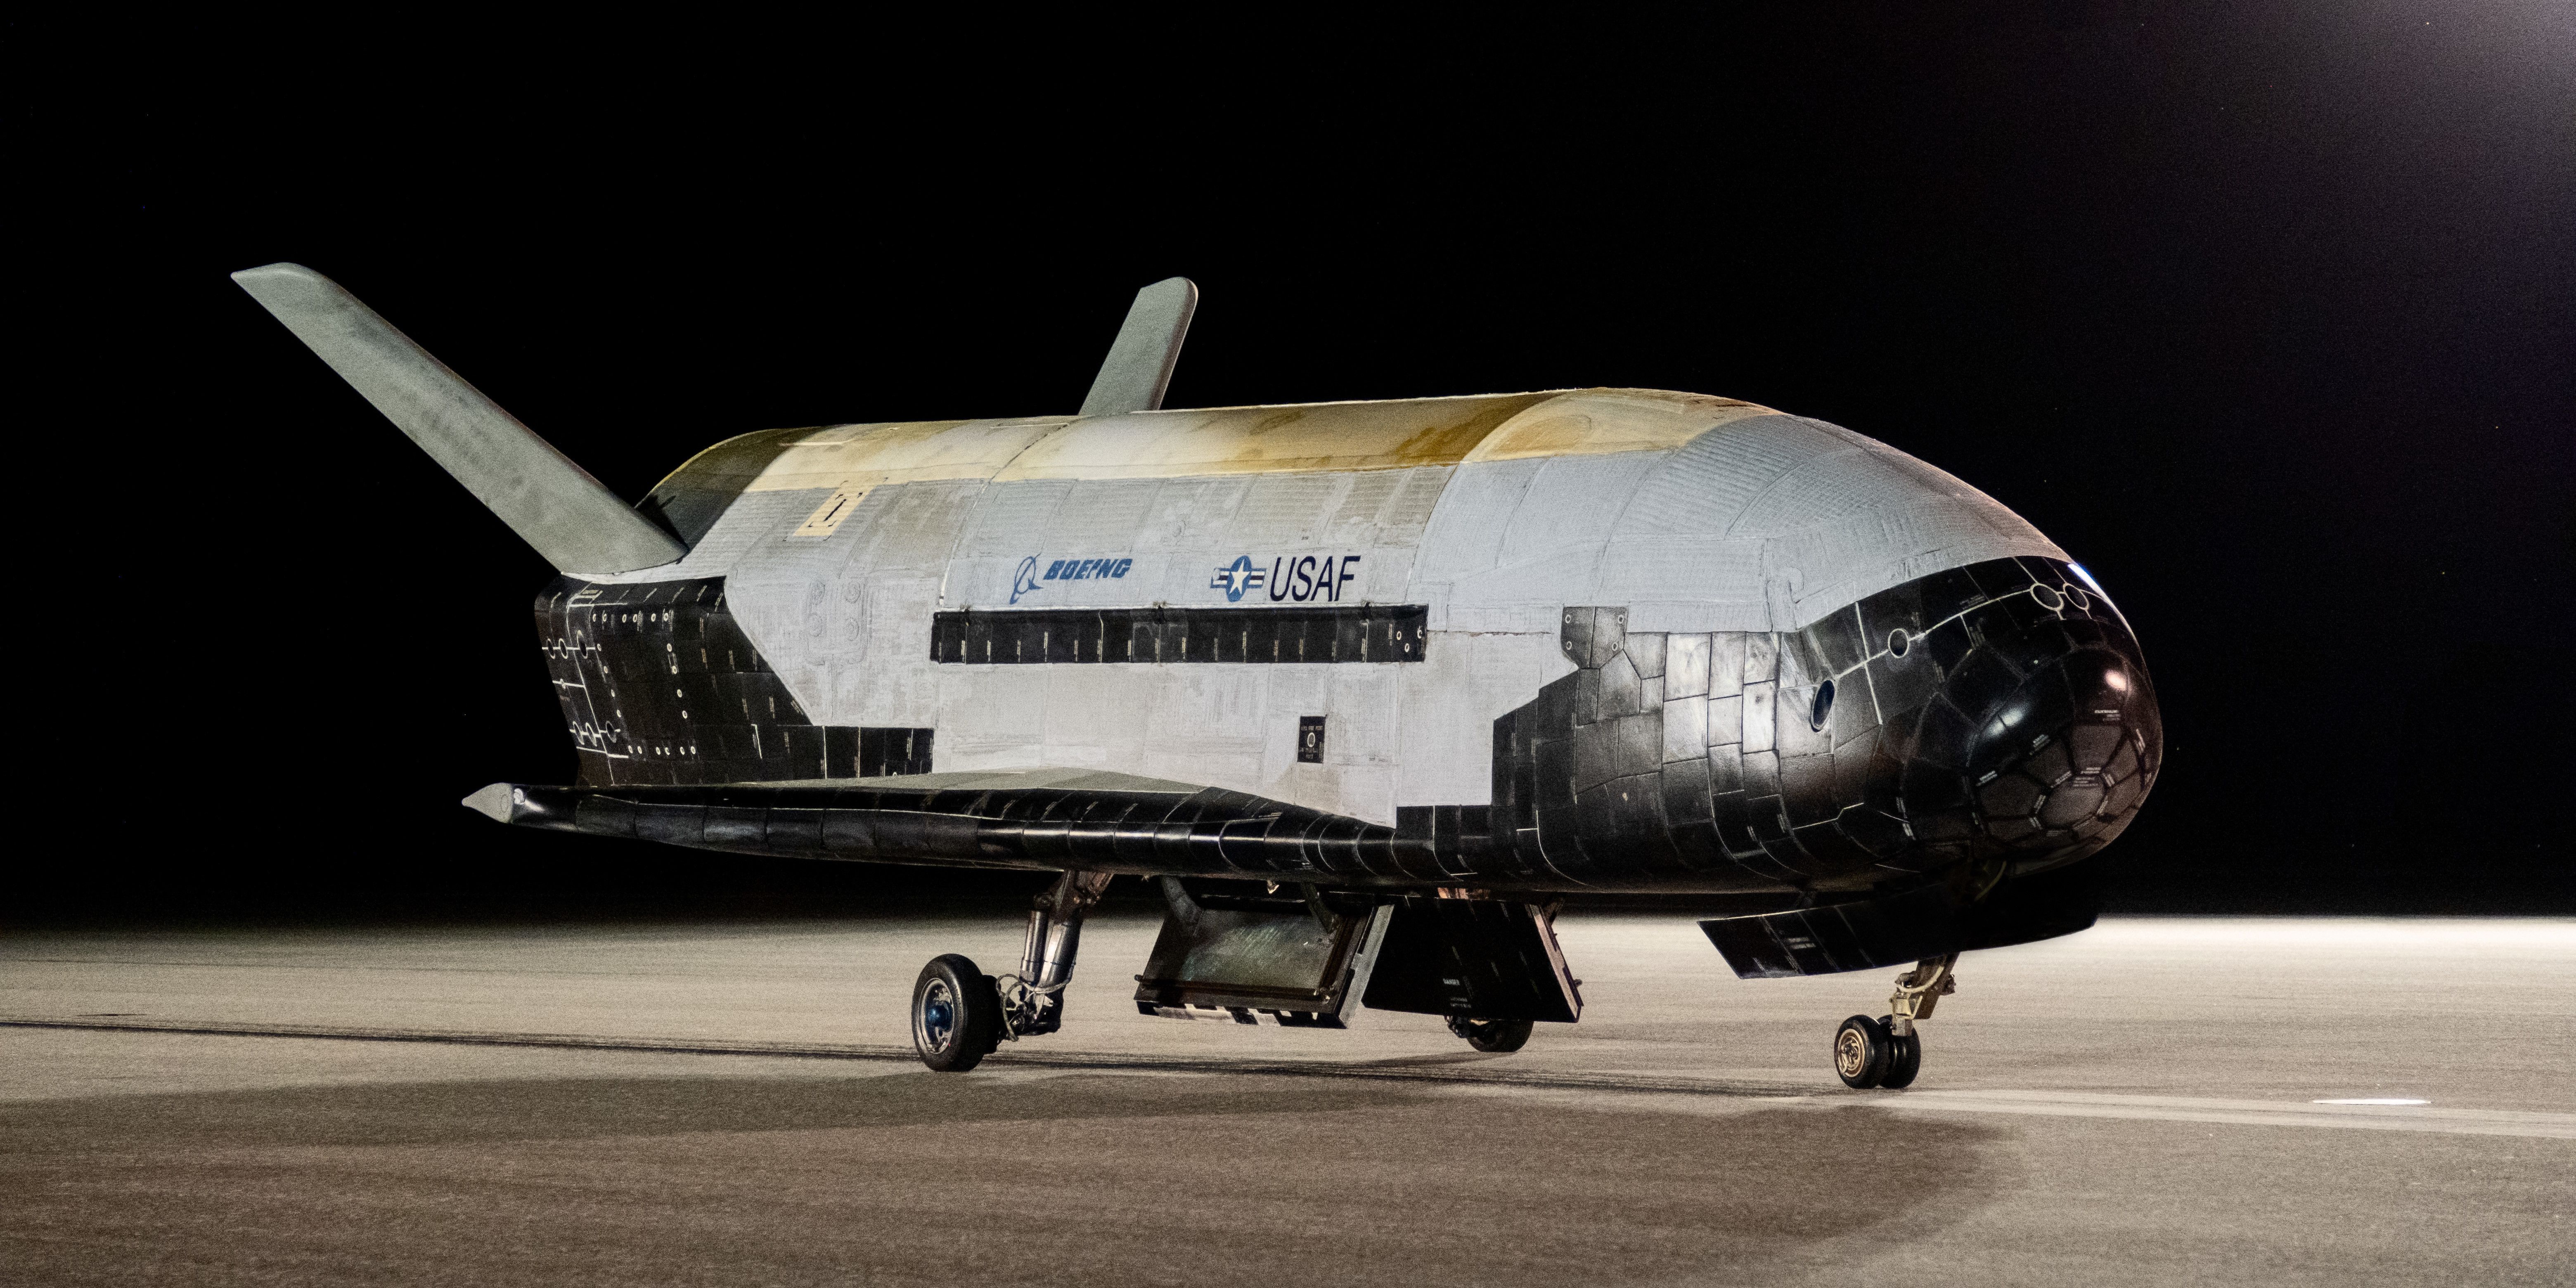 The X-37B spacecraft is pictured on the airstrip against a dark night sky